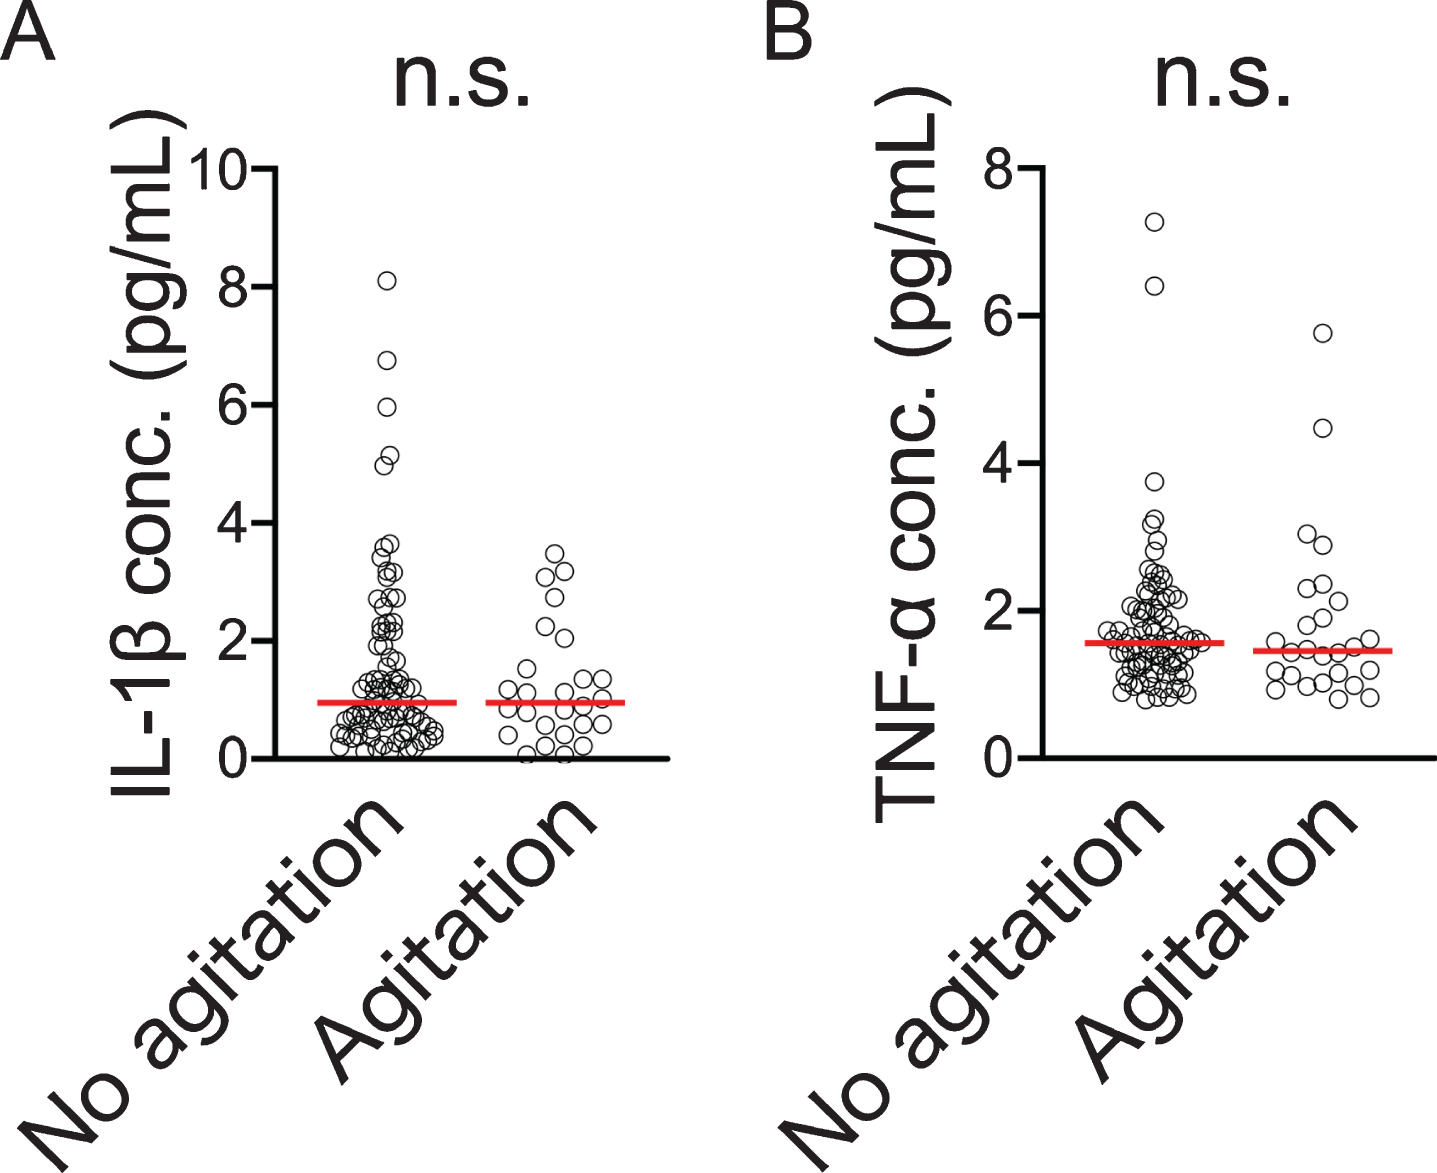 Blood IL-1β (A) and TNF-α (B) concentrations compared by presence/absence of agitation according to NPI score. Horizontal lines indicate medians n.s., not significant.